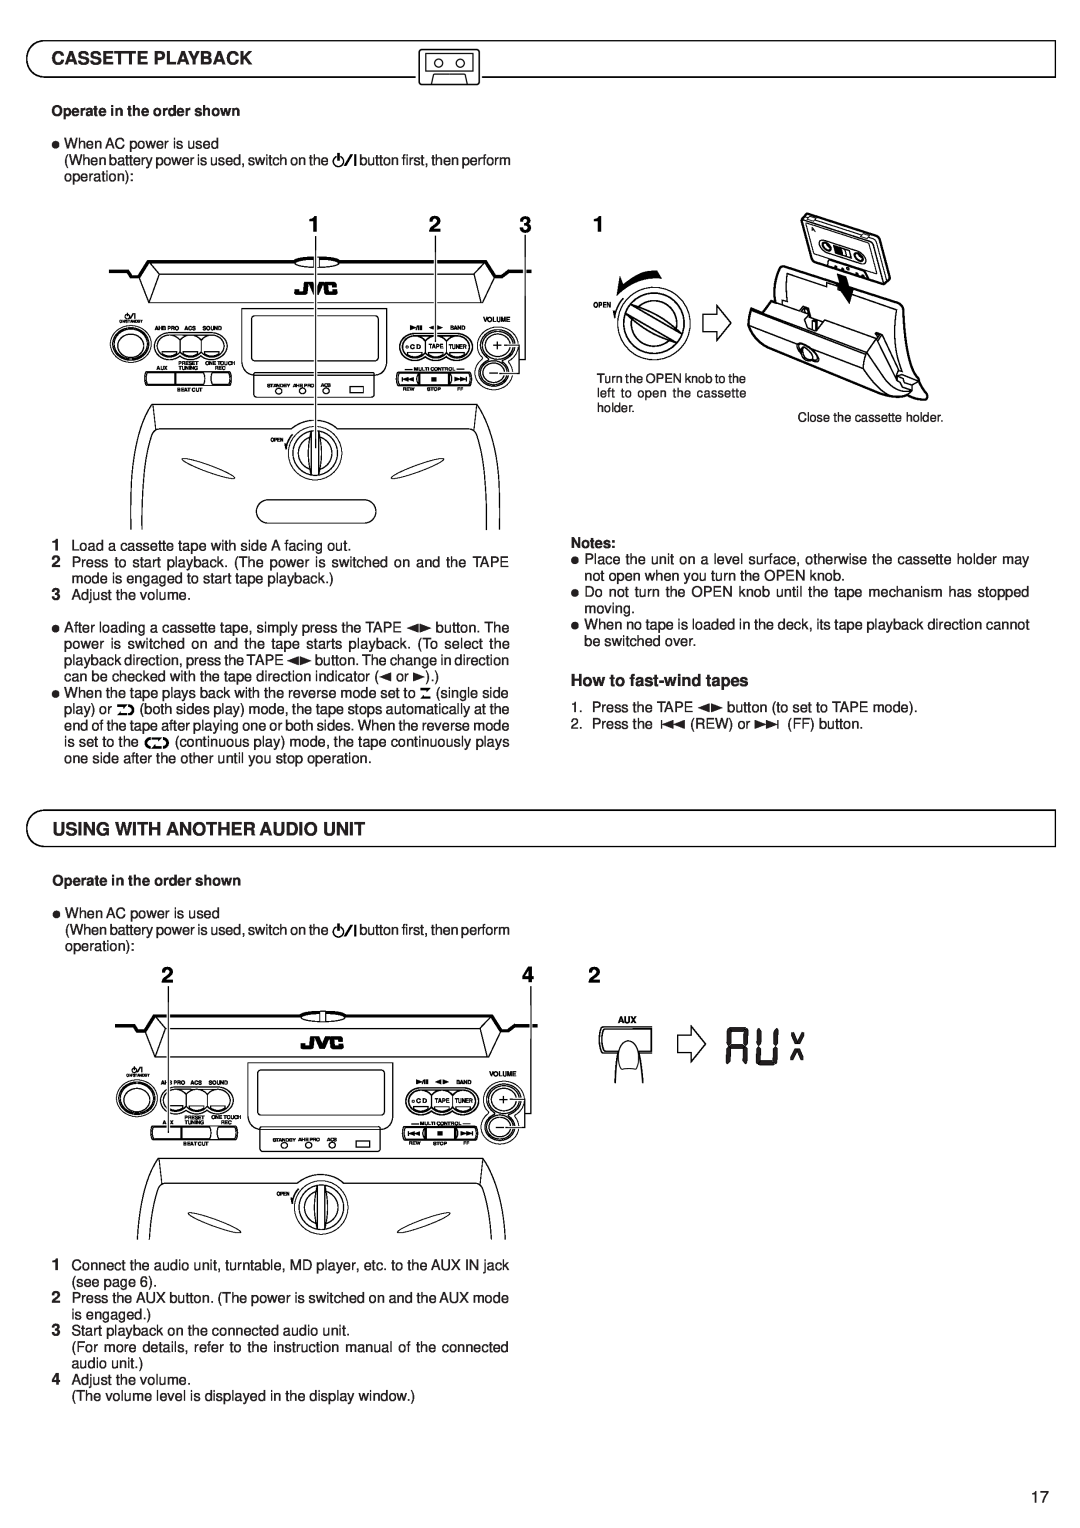 JVC RV-B55 GY, RV-B55 BU, RV-B55 LTD manual Cassette Playback, Using With Another Audio Unit, Operate in the order shown 